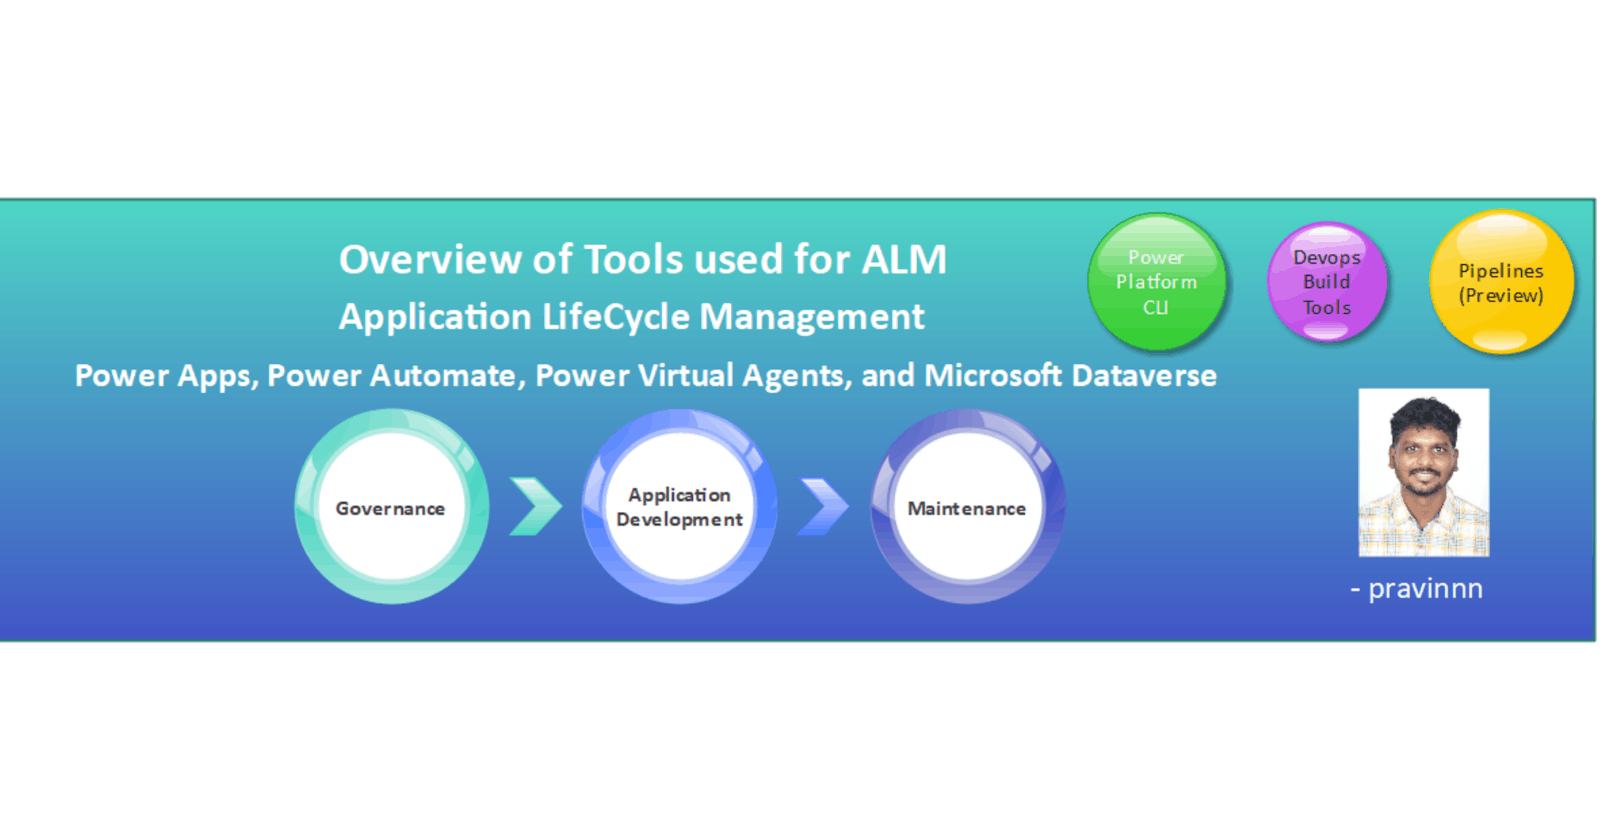 Overview of Tools used for ALM in Power Platform